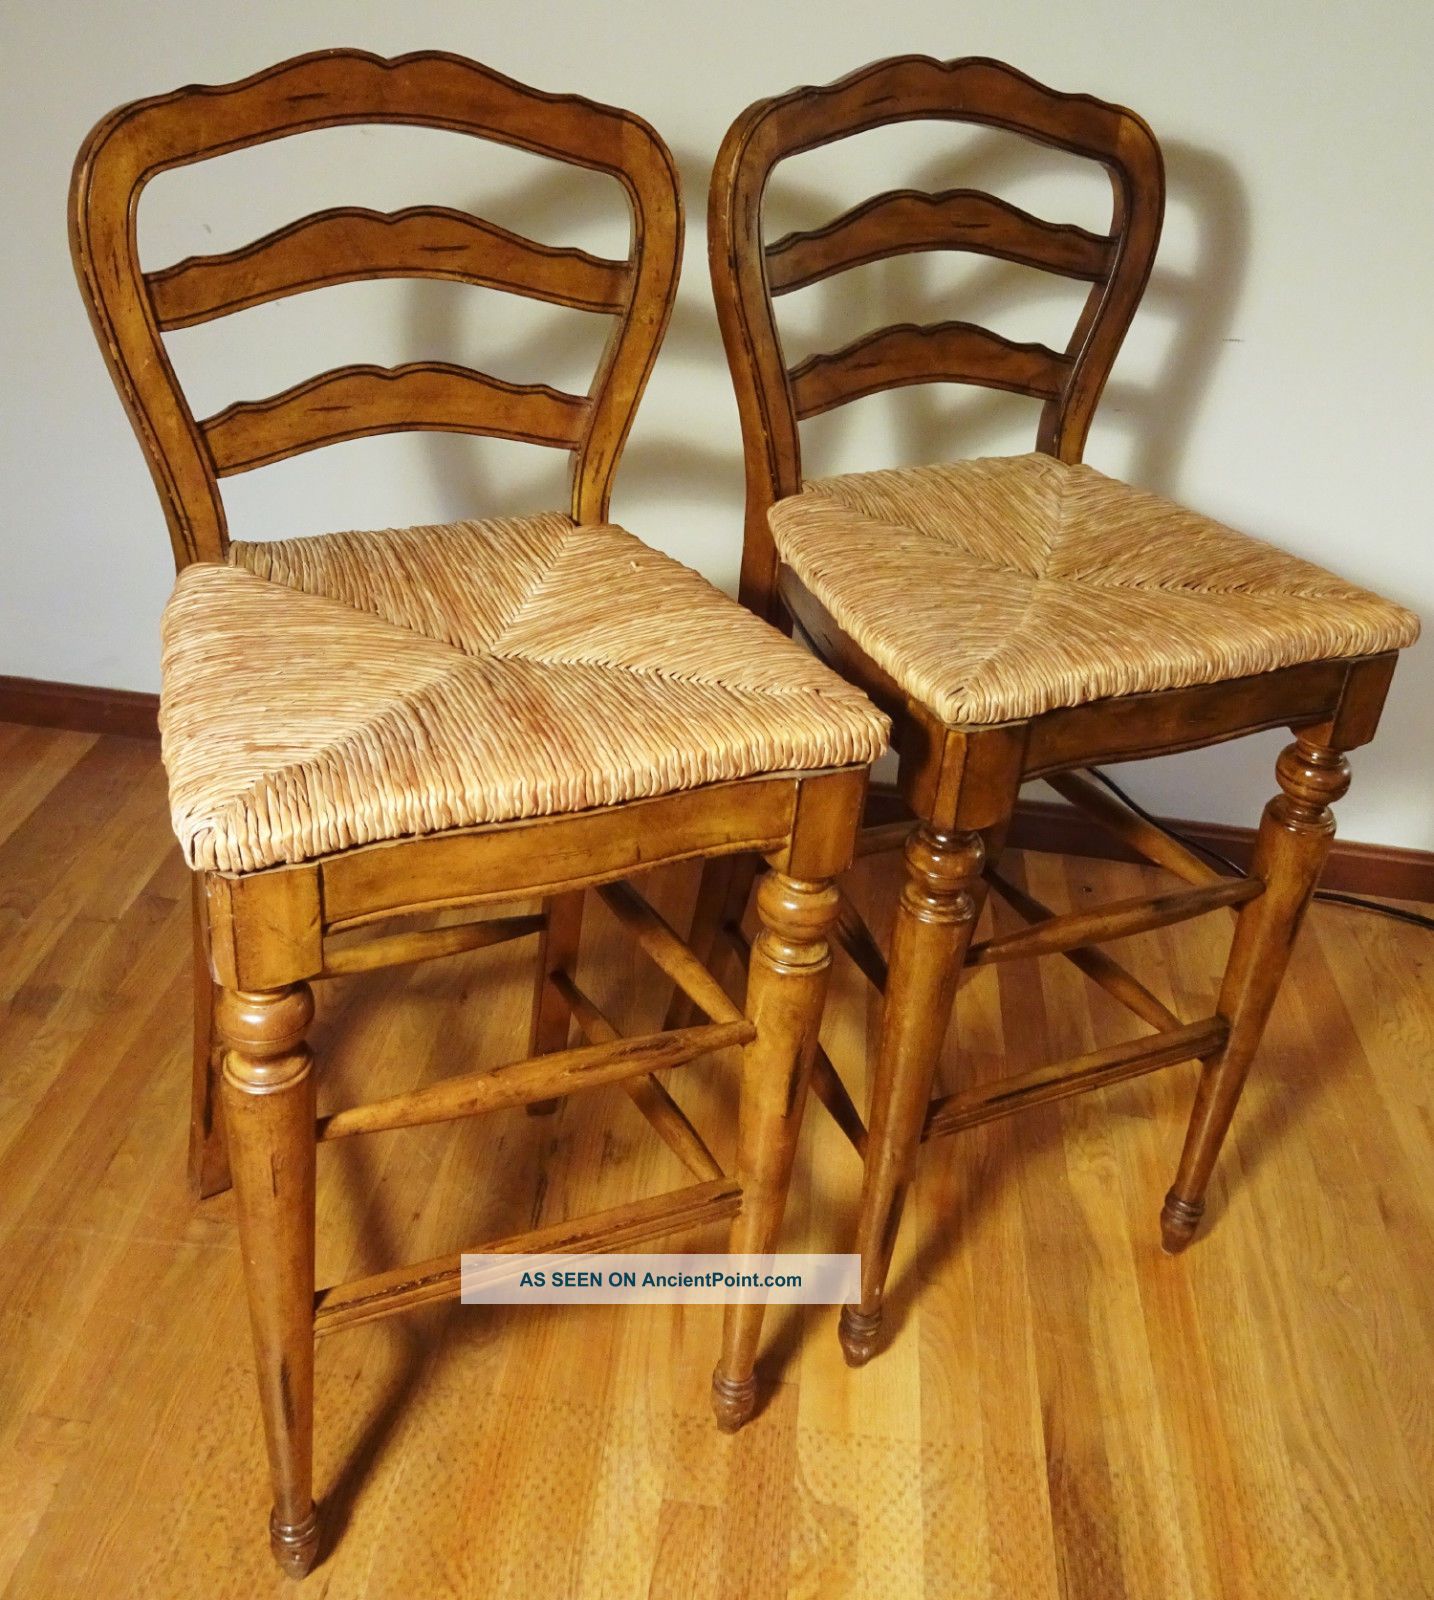 2 French Country Counter Bar Stools, French Country Counter Height Bar Stools